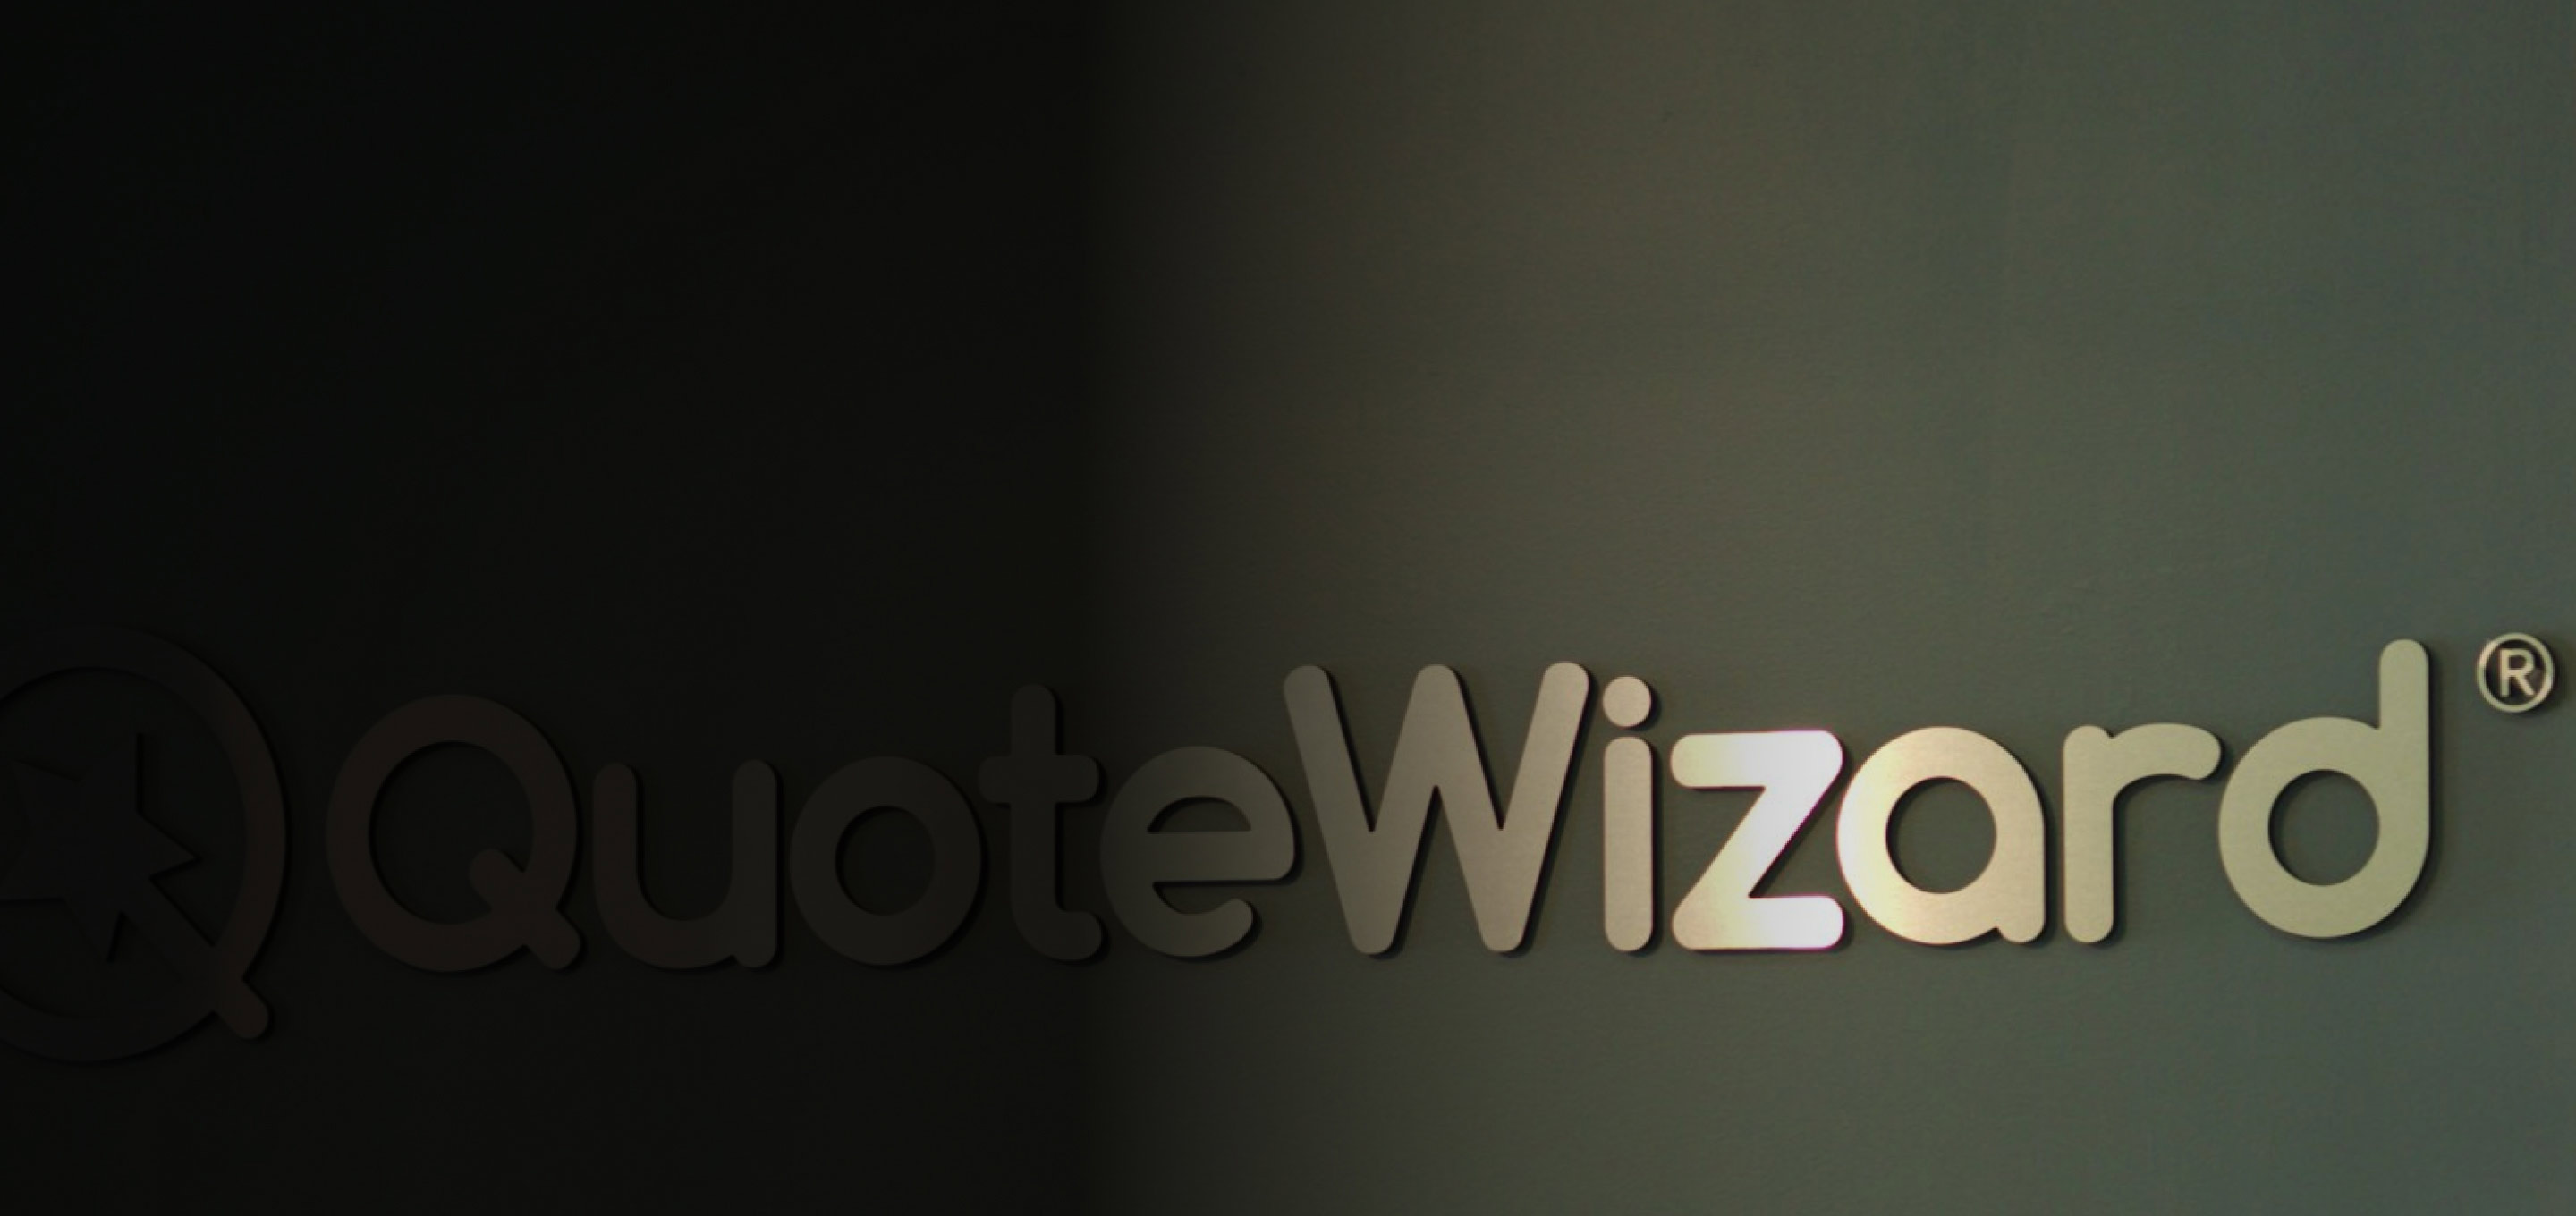 Illustrative background image of Quote Wizard